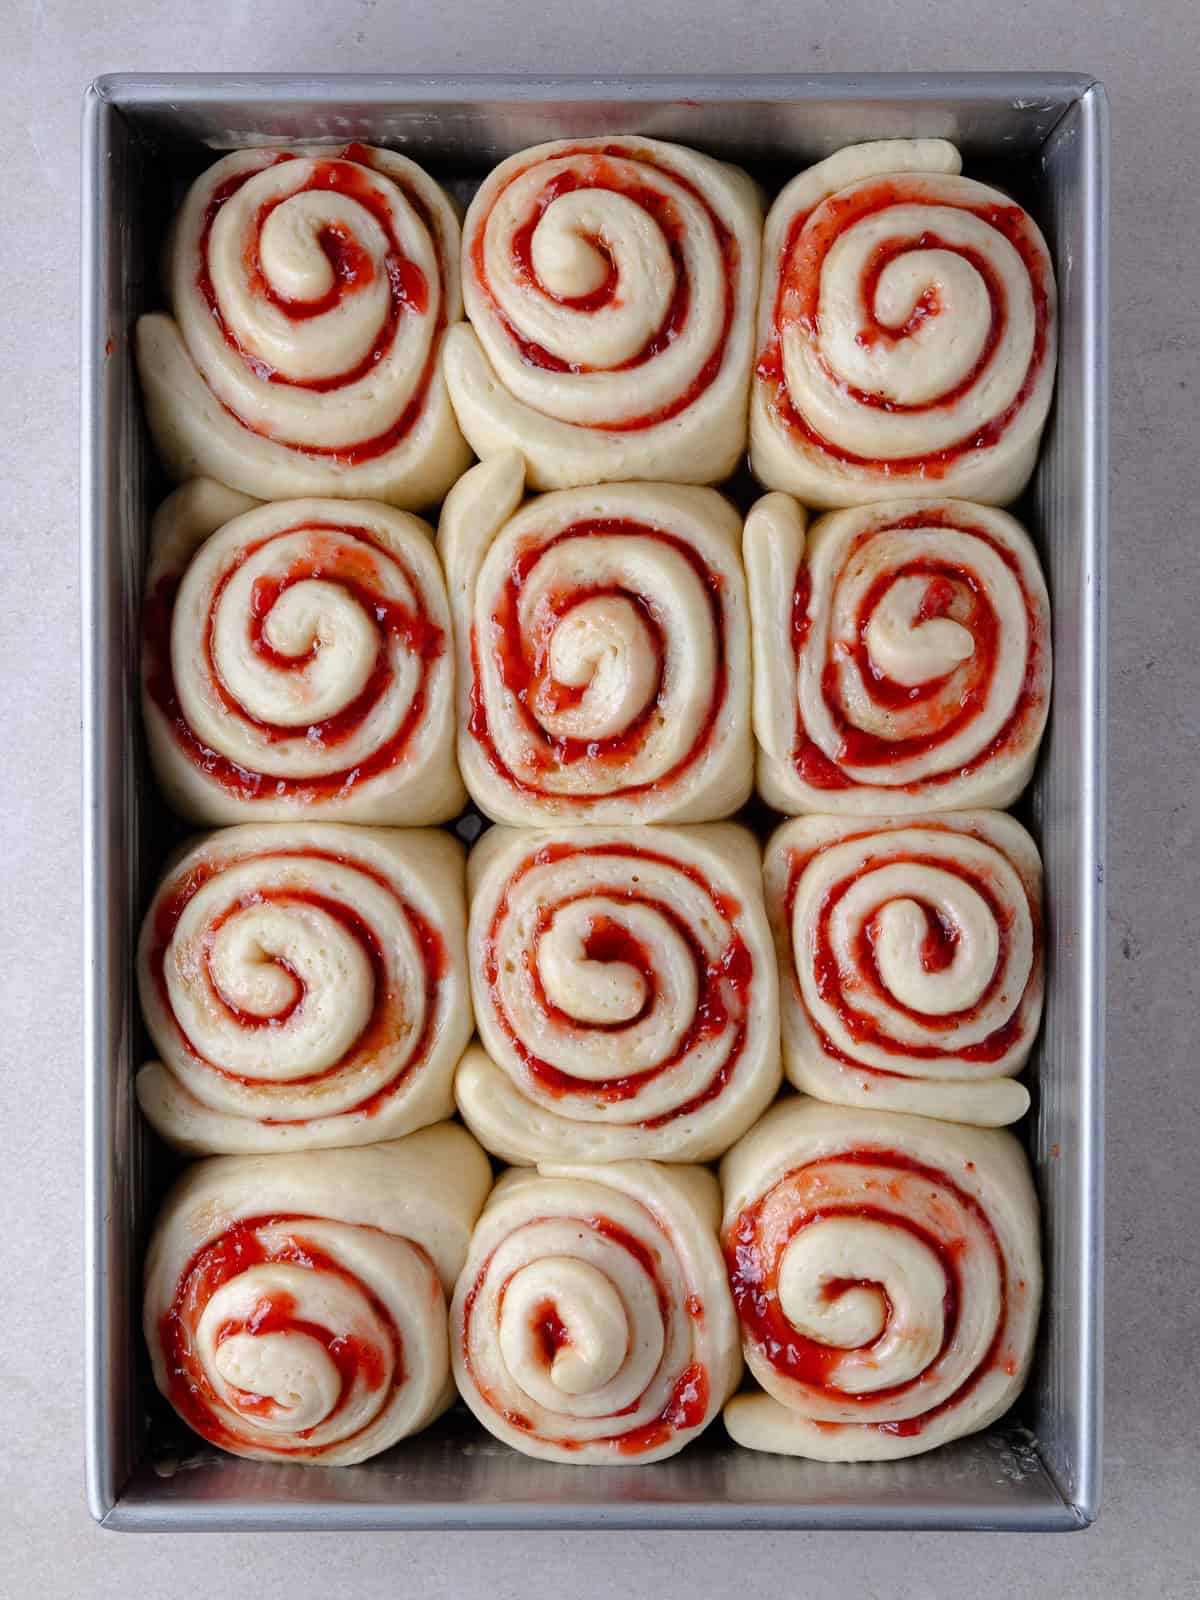 Strawberries cinnamon rolls after it has finished proofing and is ready to be baked in the oven.